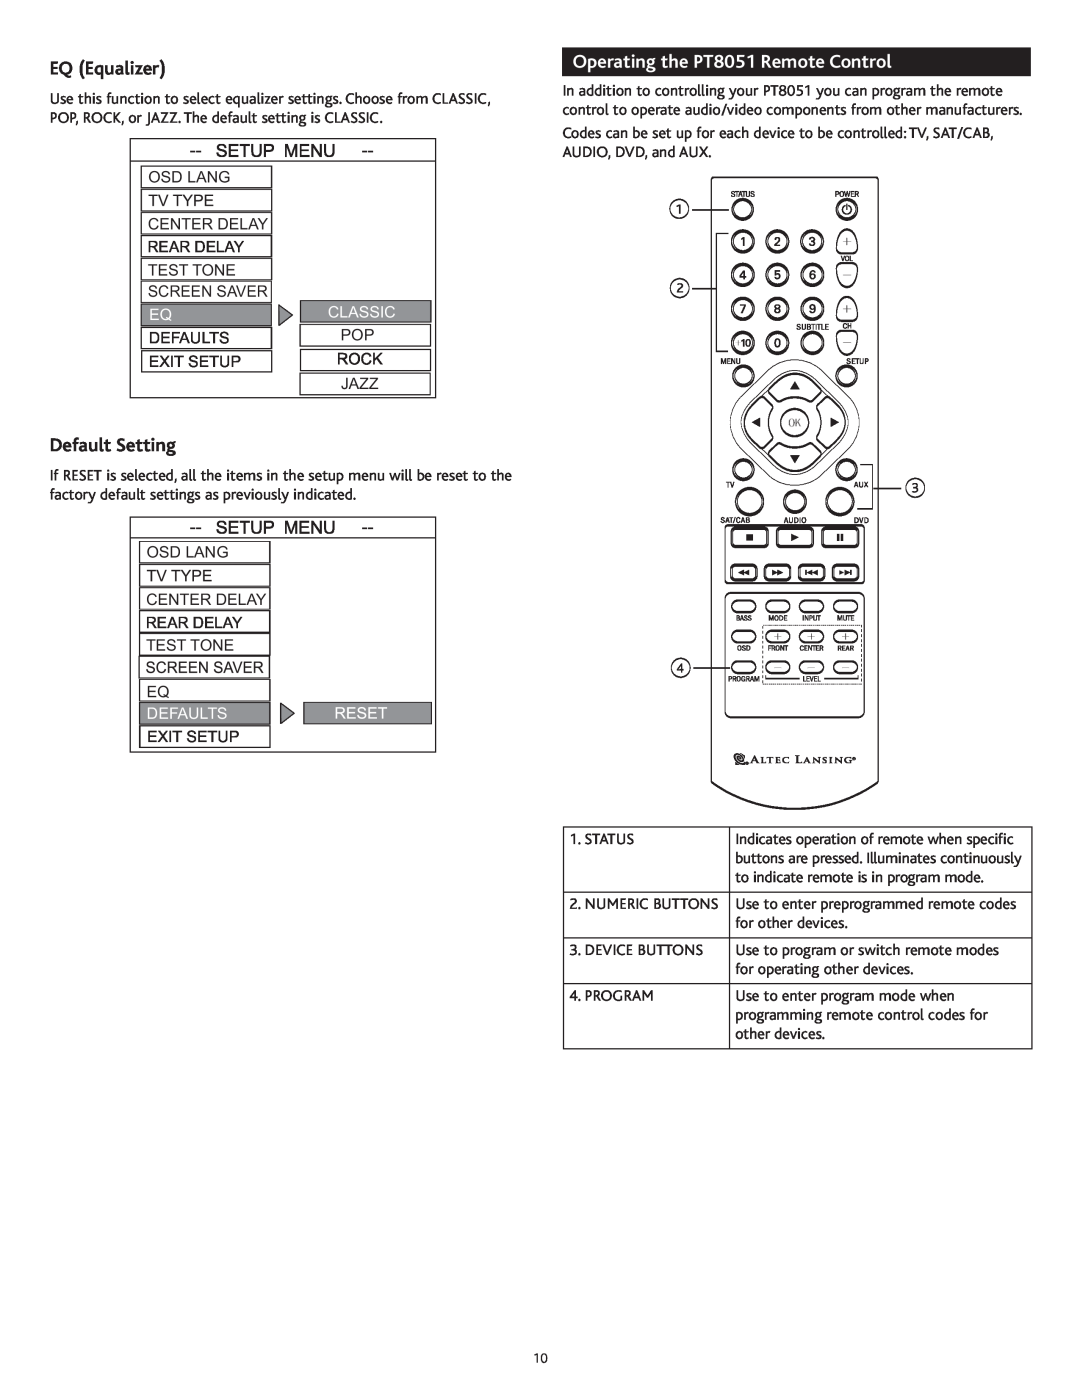 Altec Lansing manual EQ Equalizer, Default Setting, Operating the PT8051 Remote Control, Classic, Defaults 